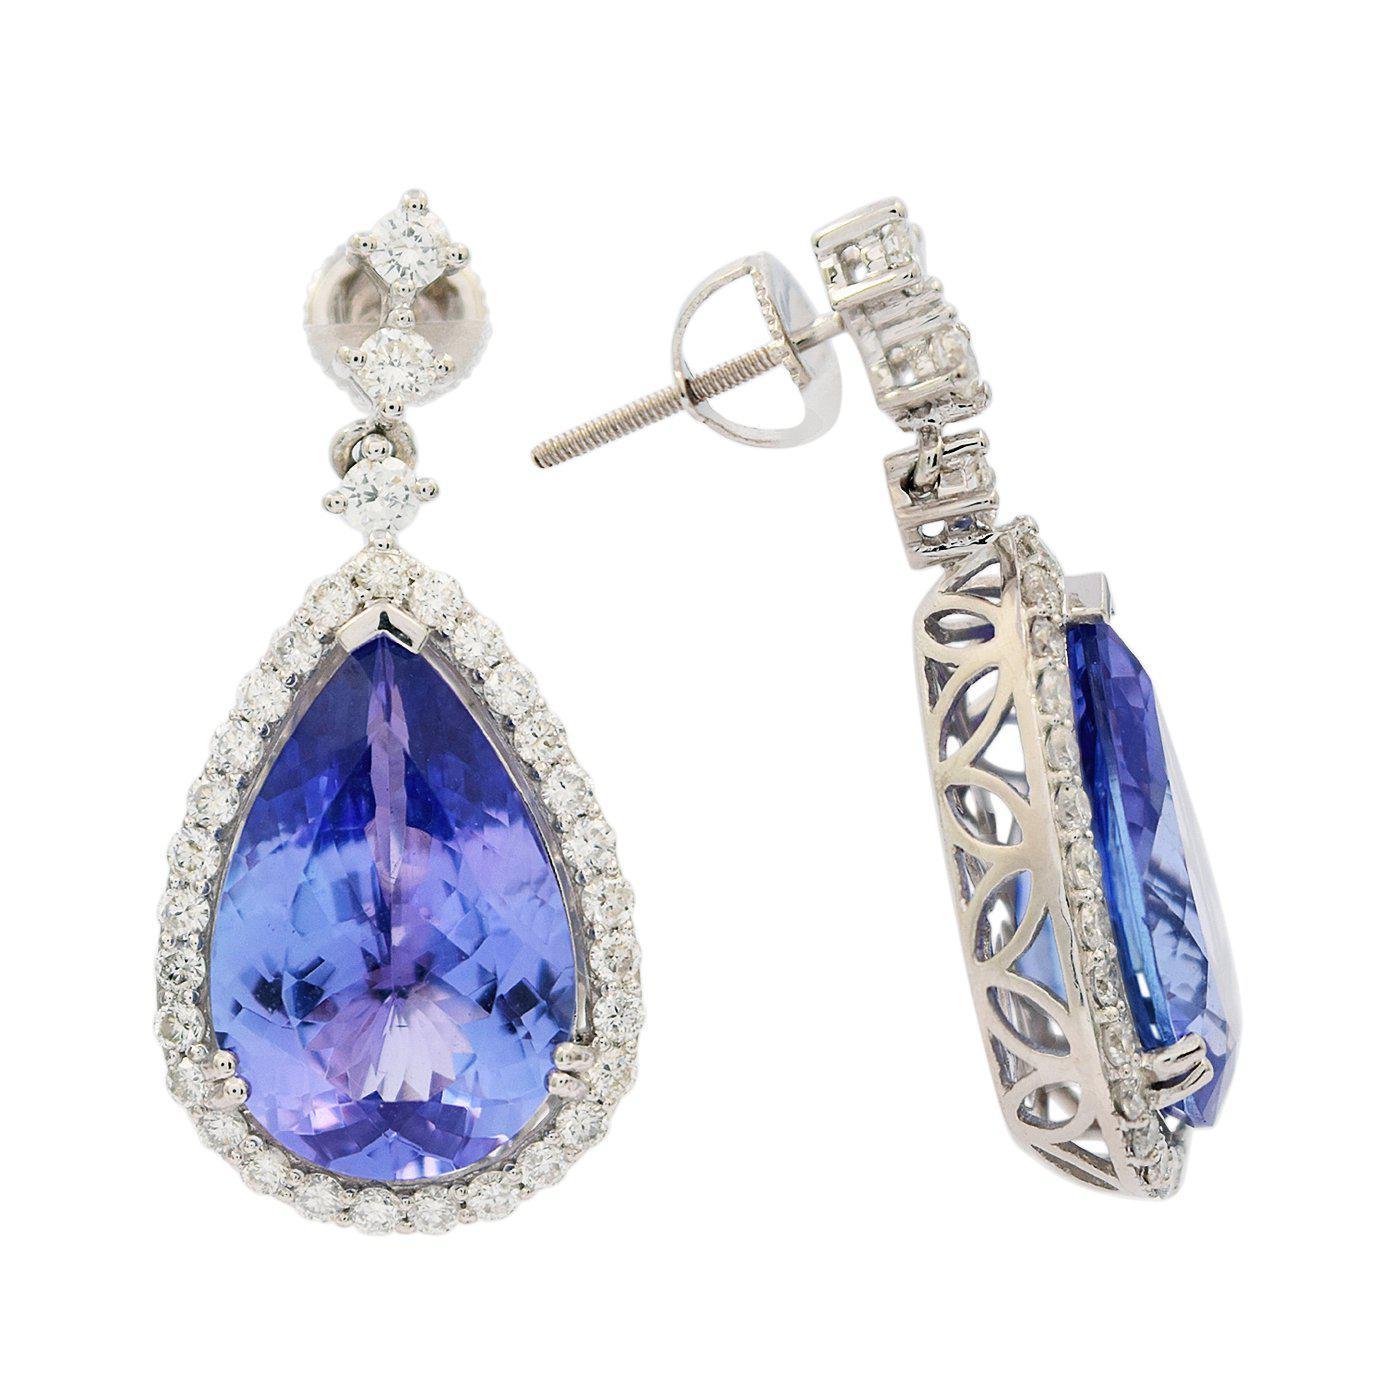 One pair electronically tested platinum ladies cast & assembled tanzanite and diamond dangle earrings with screw backs. Each earring features a tanzanite set within a diamond bezel suspended from a diamond ribbon. Bright polish finish. Identified